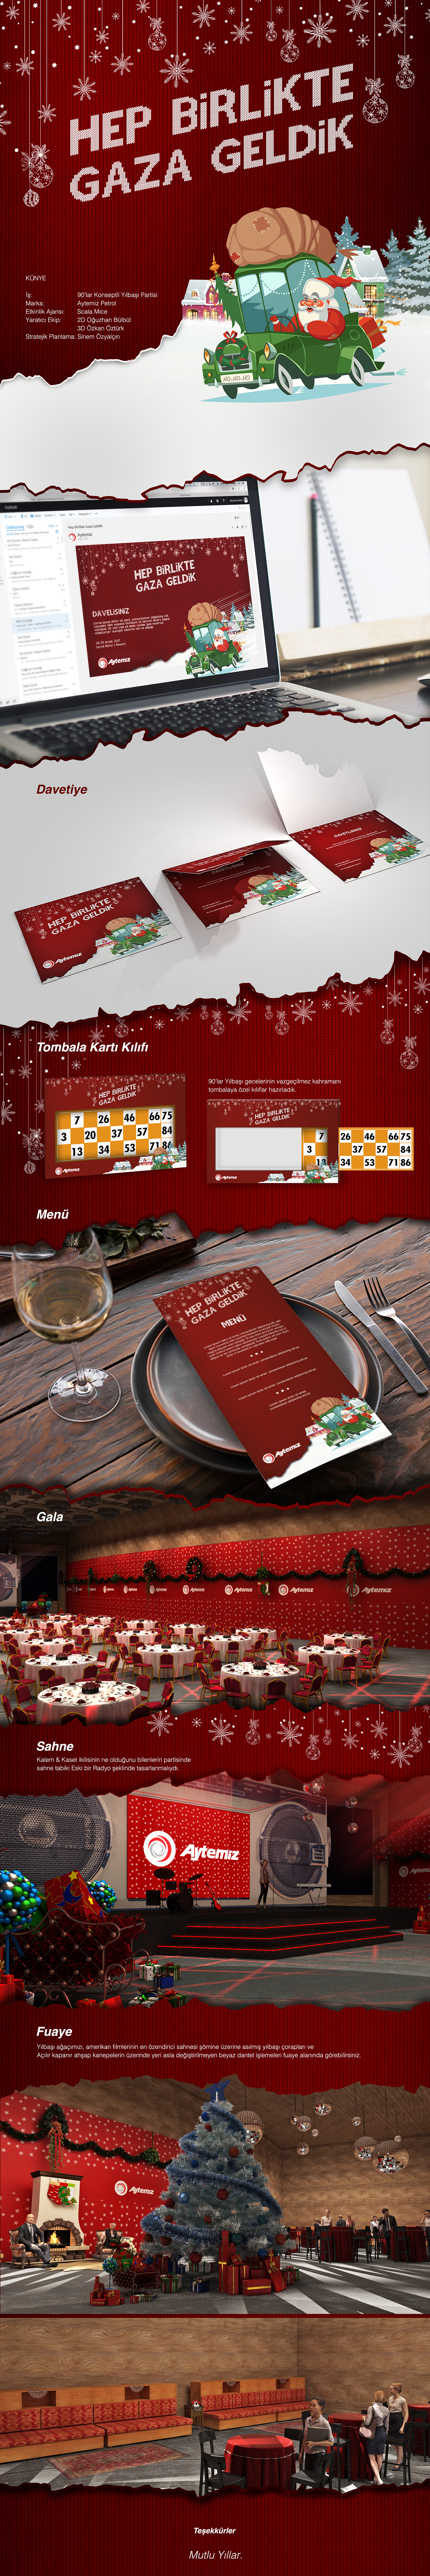 New Year Card new year mice Event Design key visual Christmas